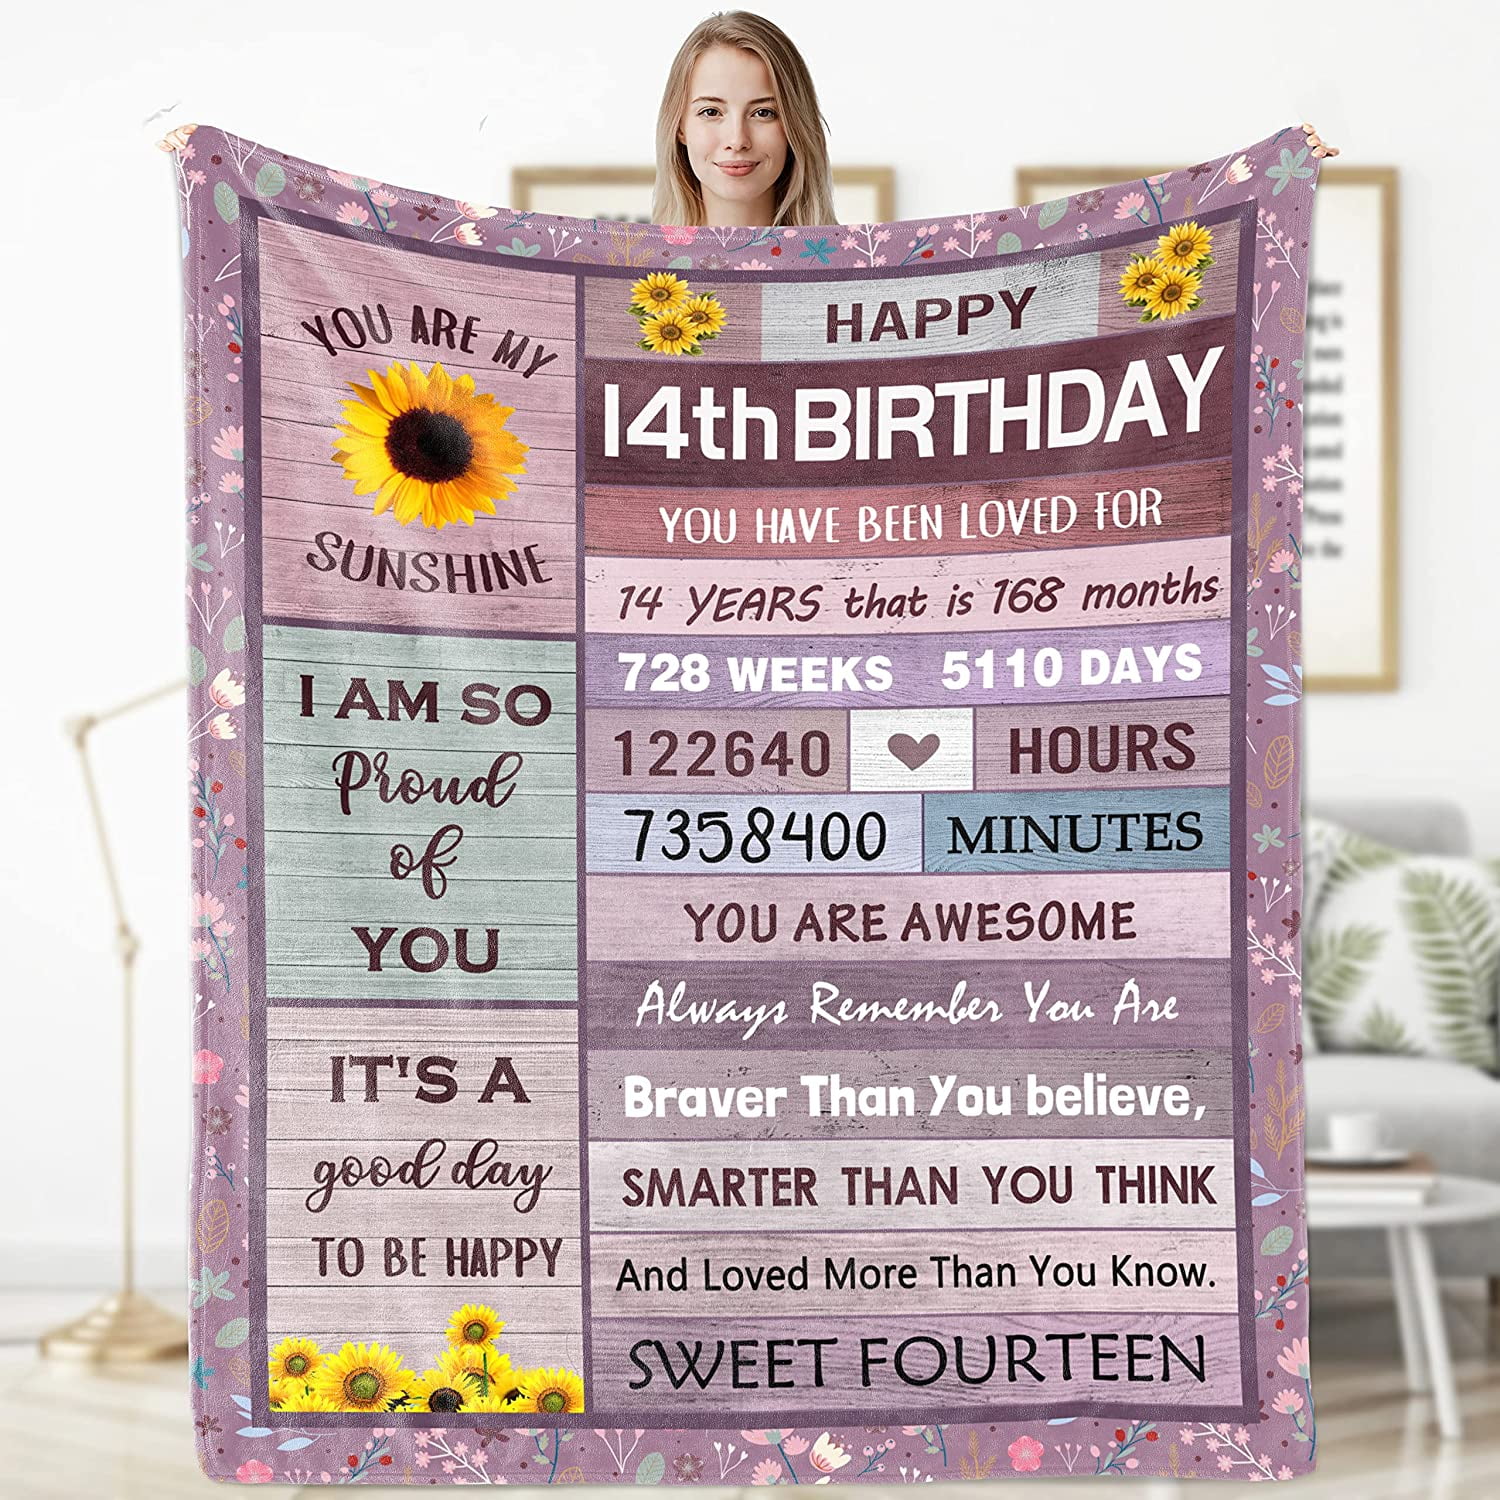 11 Year Old Girl Birthday Gift Ideas Gifts for 11 Year Old Girls Birthday  Gif